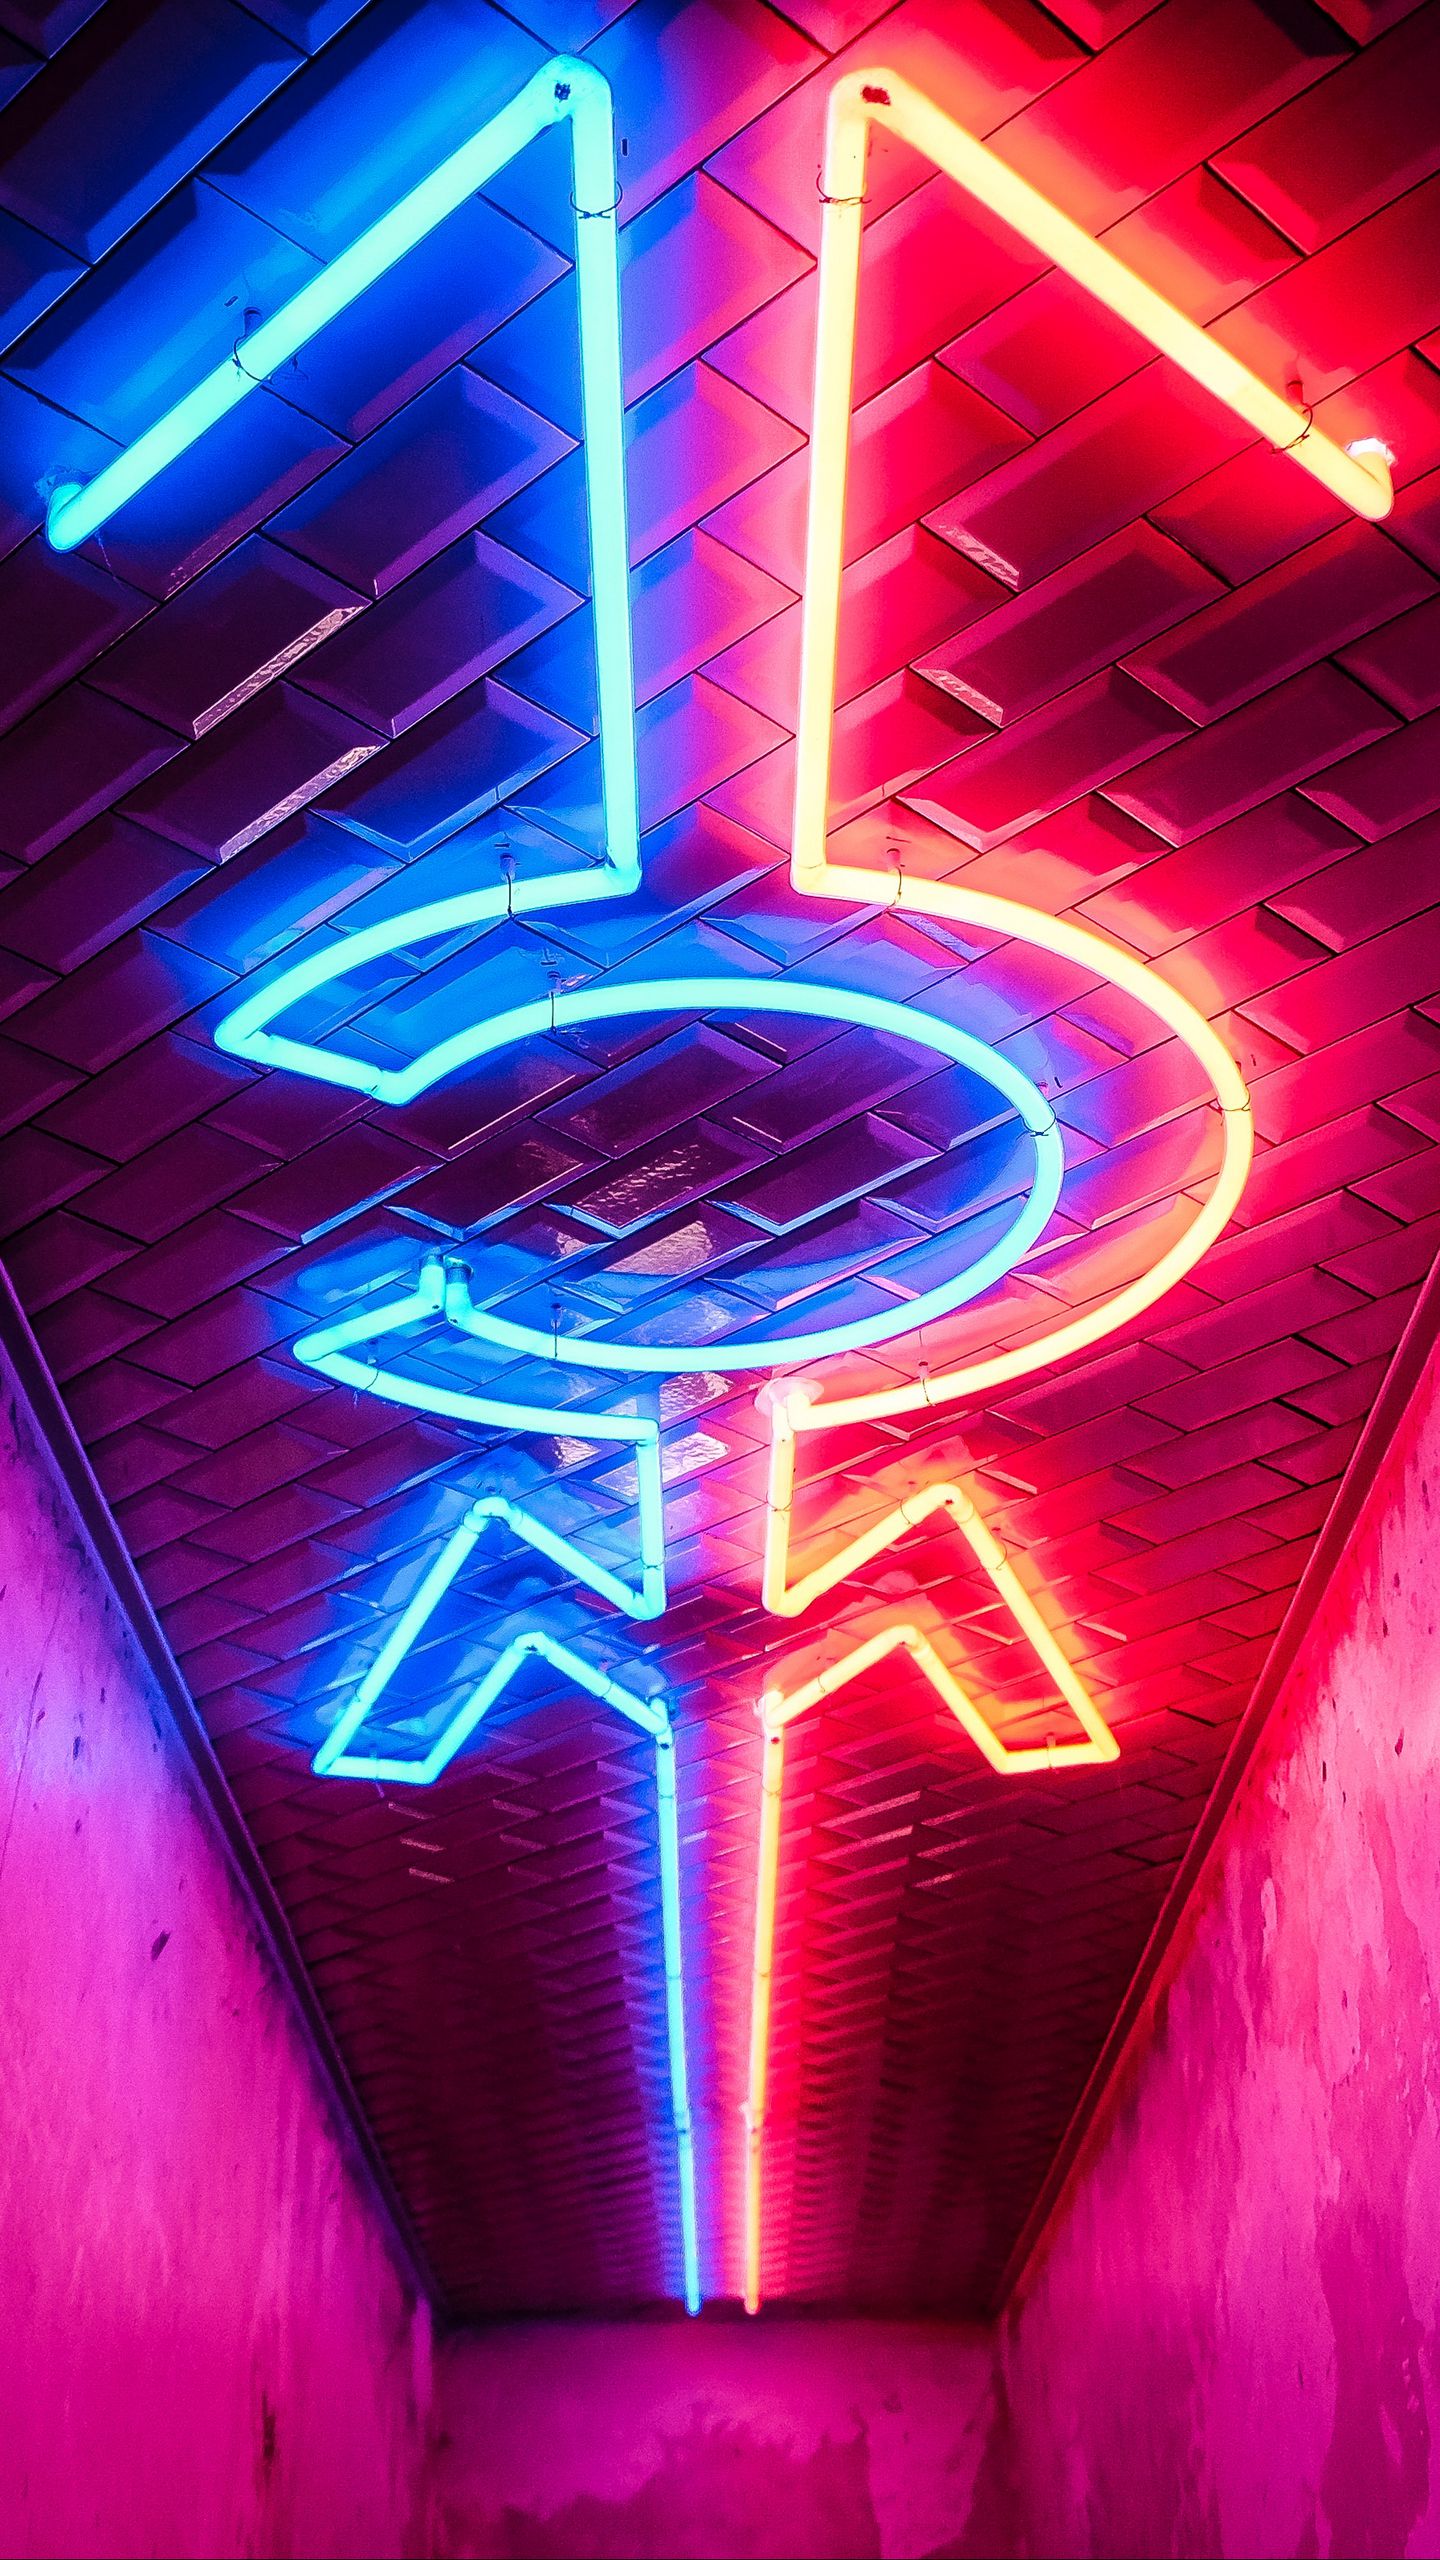 Download wallpaper 1440x2560 neon, lighting, direction, ceiling qhd samsung  galaxy s6, s7, edge, note, lg g4 hd background